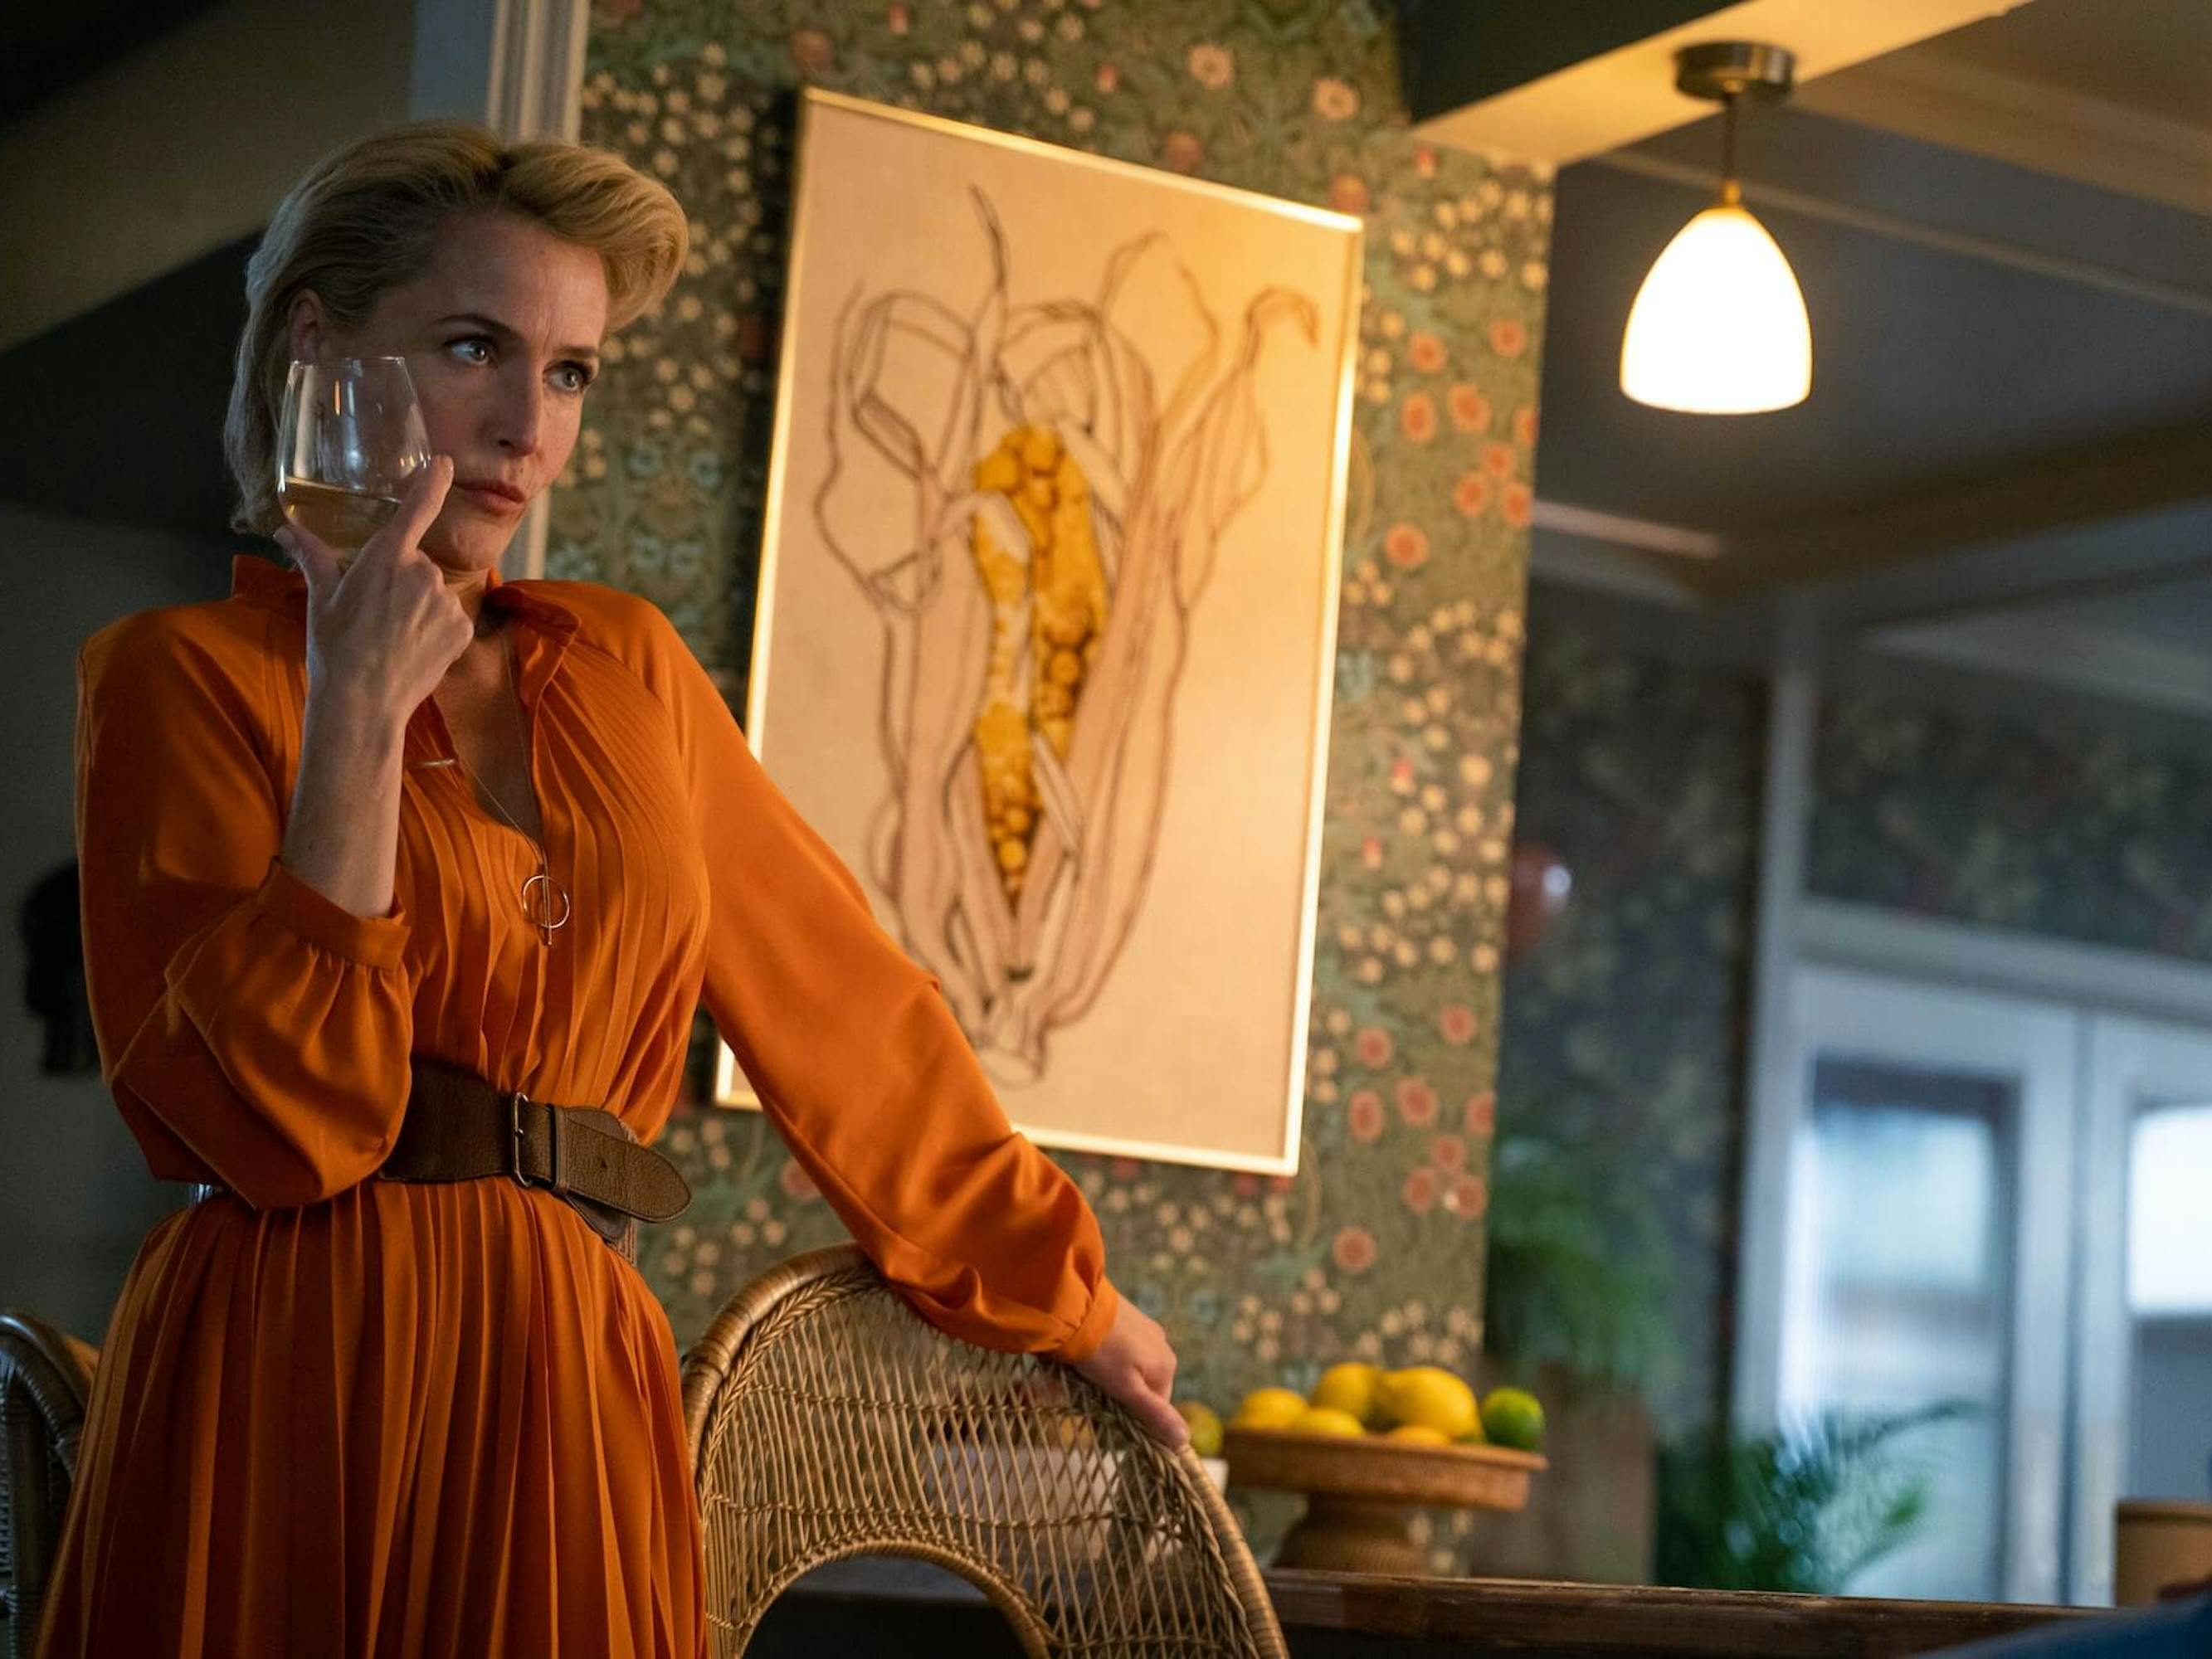 Jean Milburn (Gillian Anderson) in Sex Education stands next to a wicker chair wearing an orange dress and holding a glass of white wine.